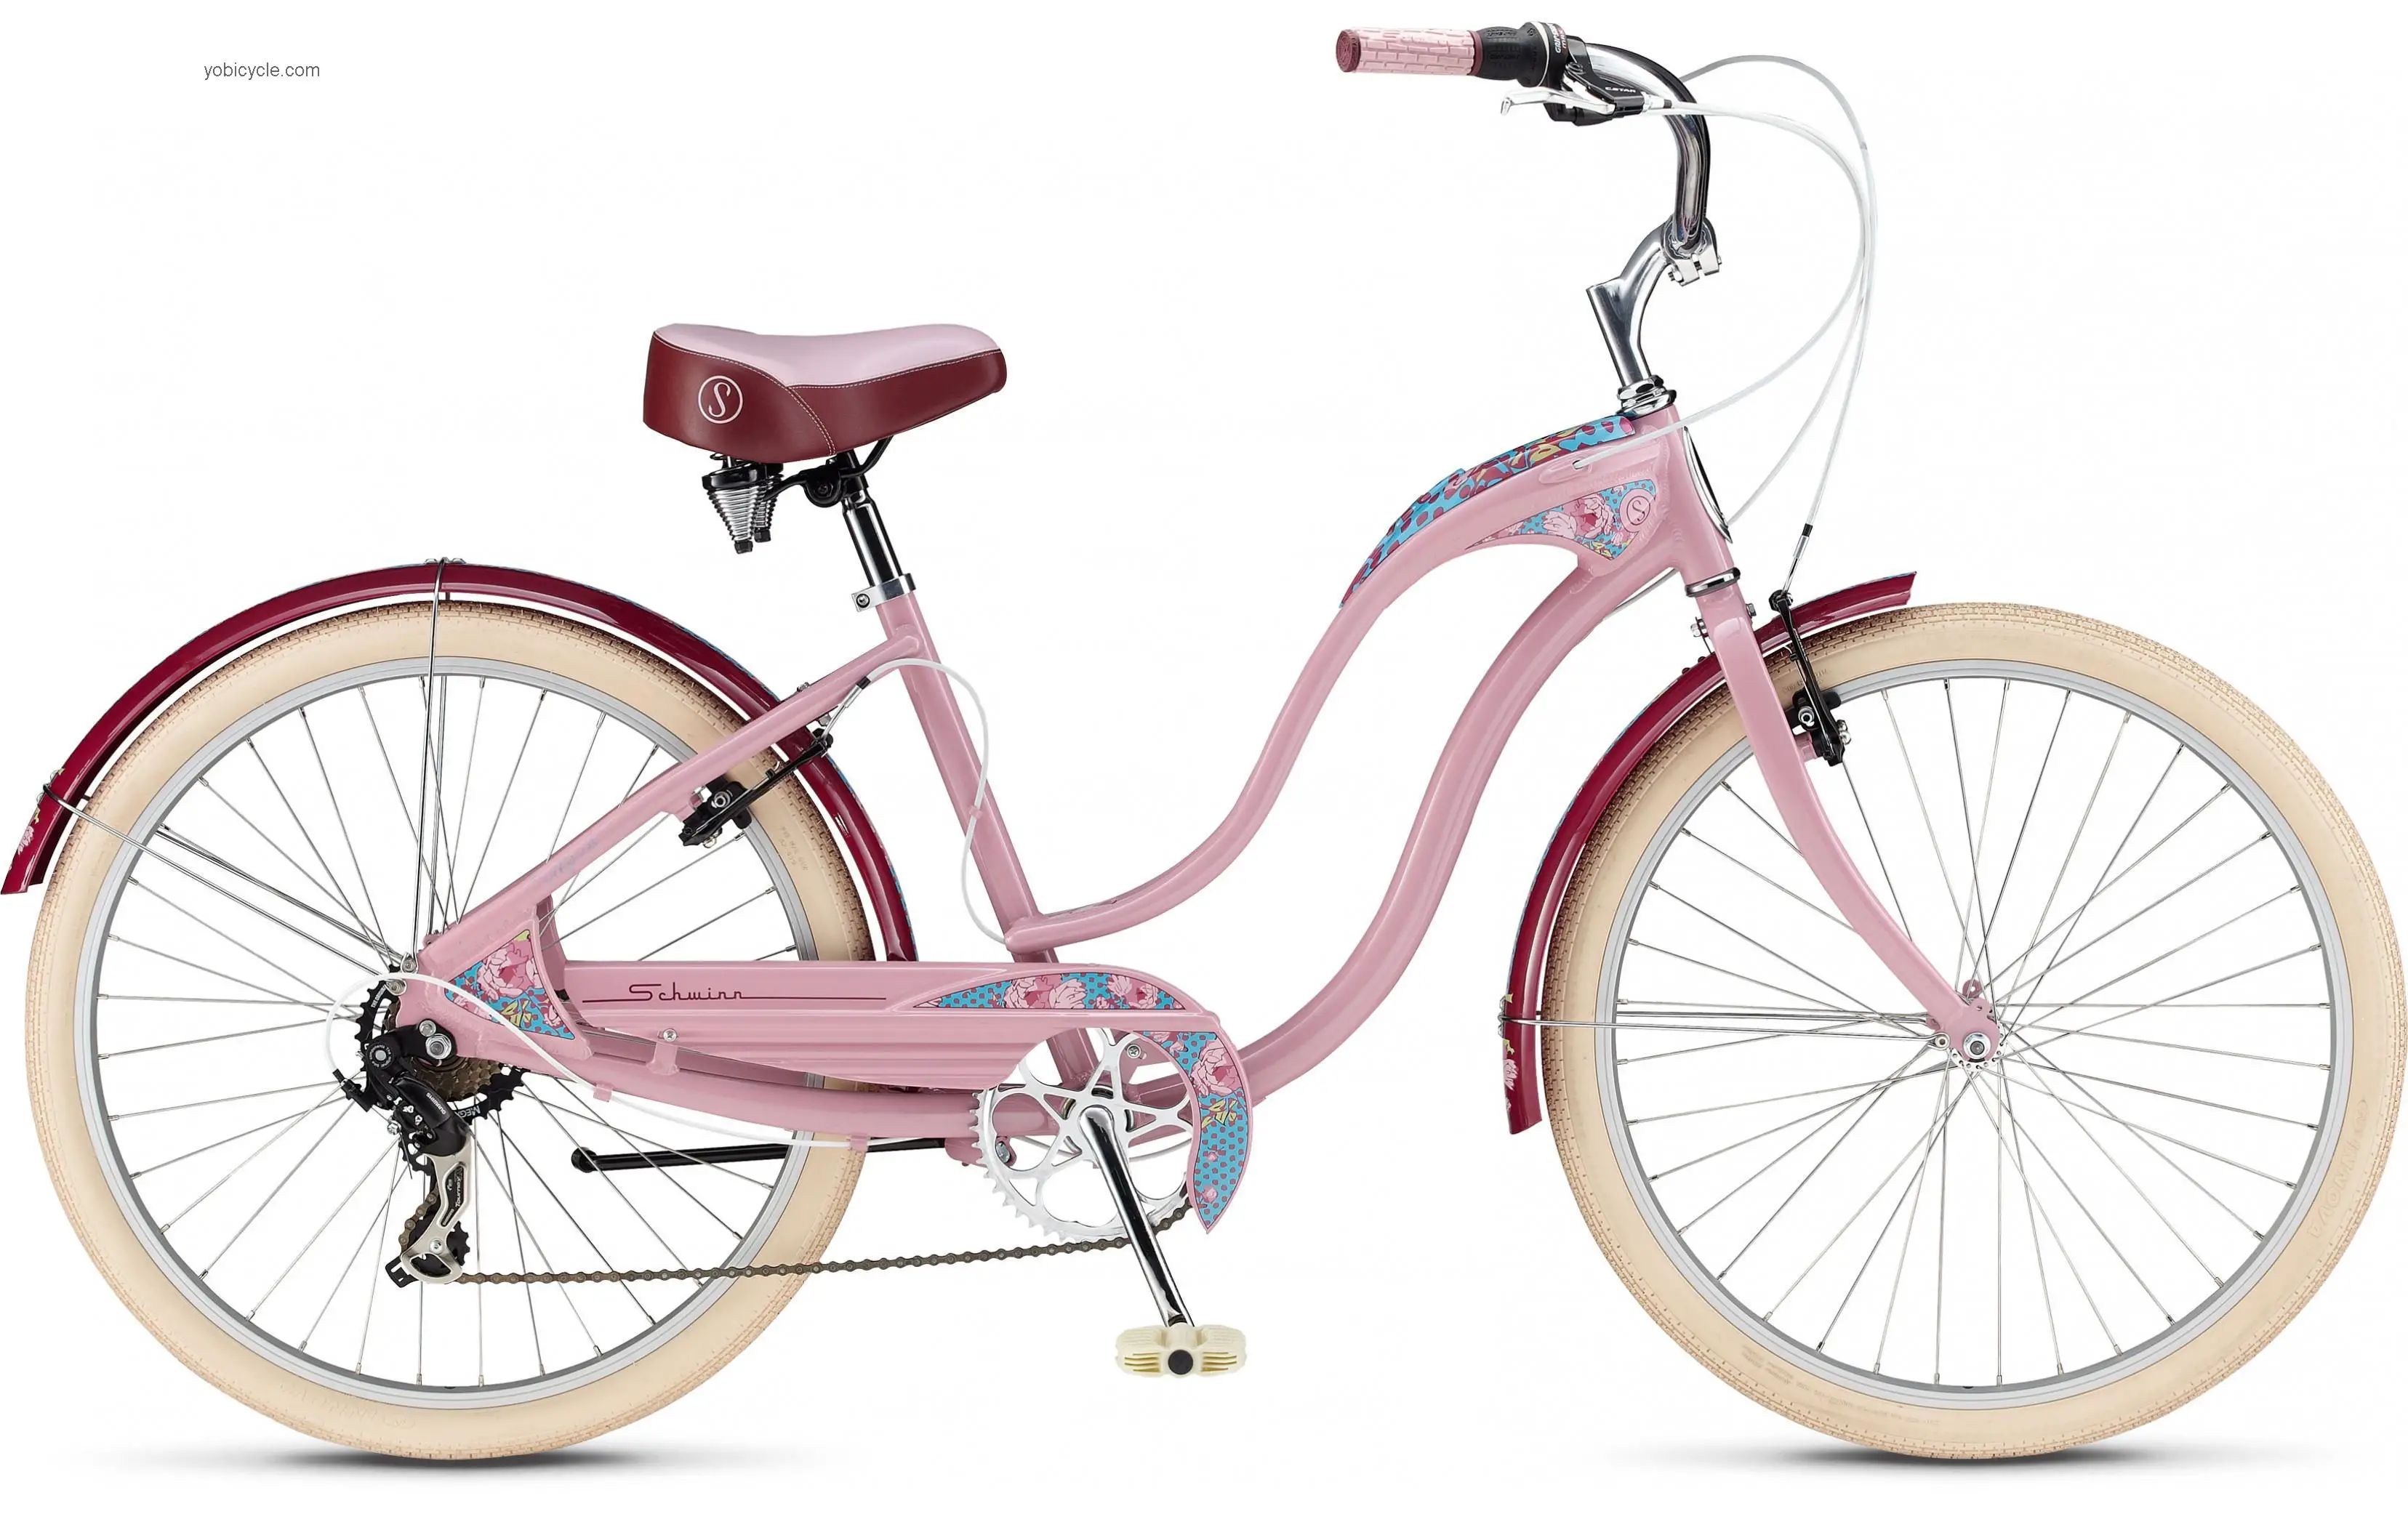 Schwinn Hollywood 2012 comparison online with competitors